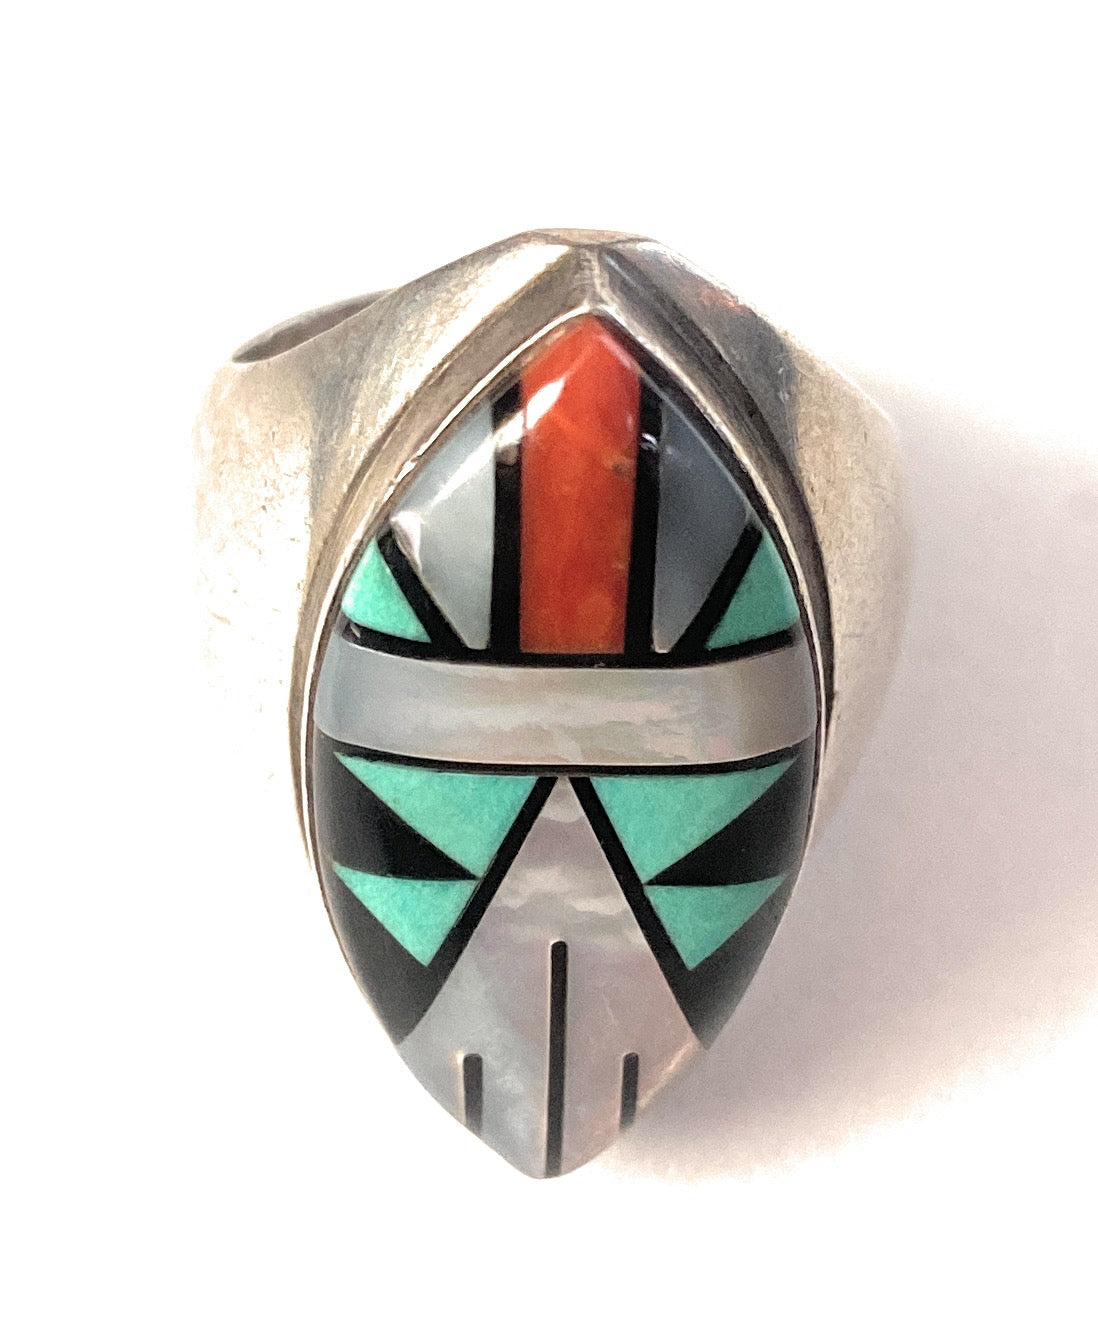 Old Pawn Vintage Navajo Sterling Silver & Multi Stone Inlay Ring Size 10.5